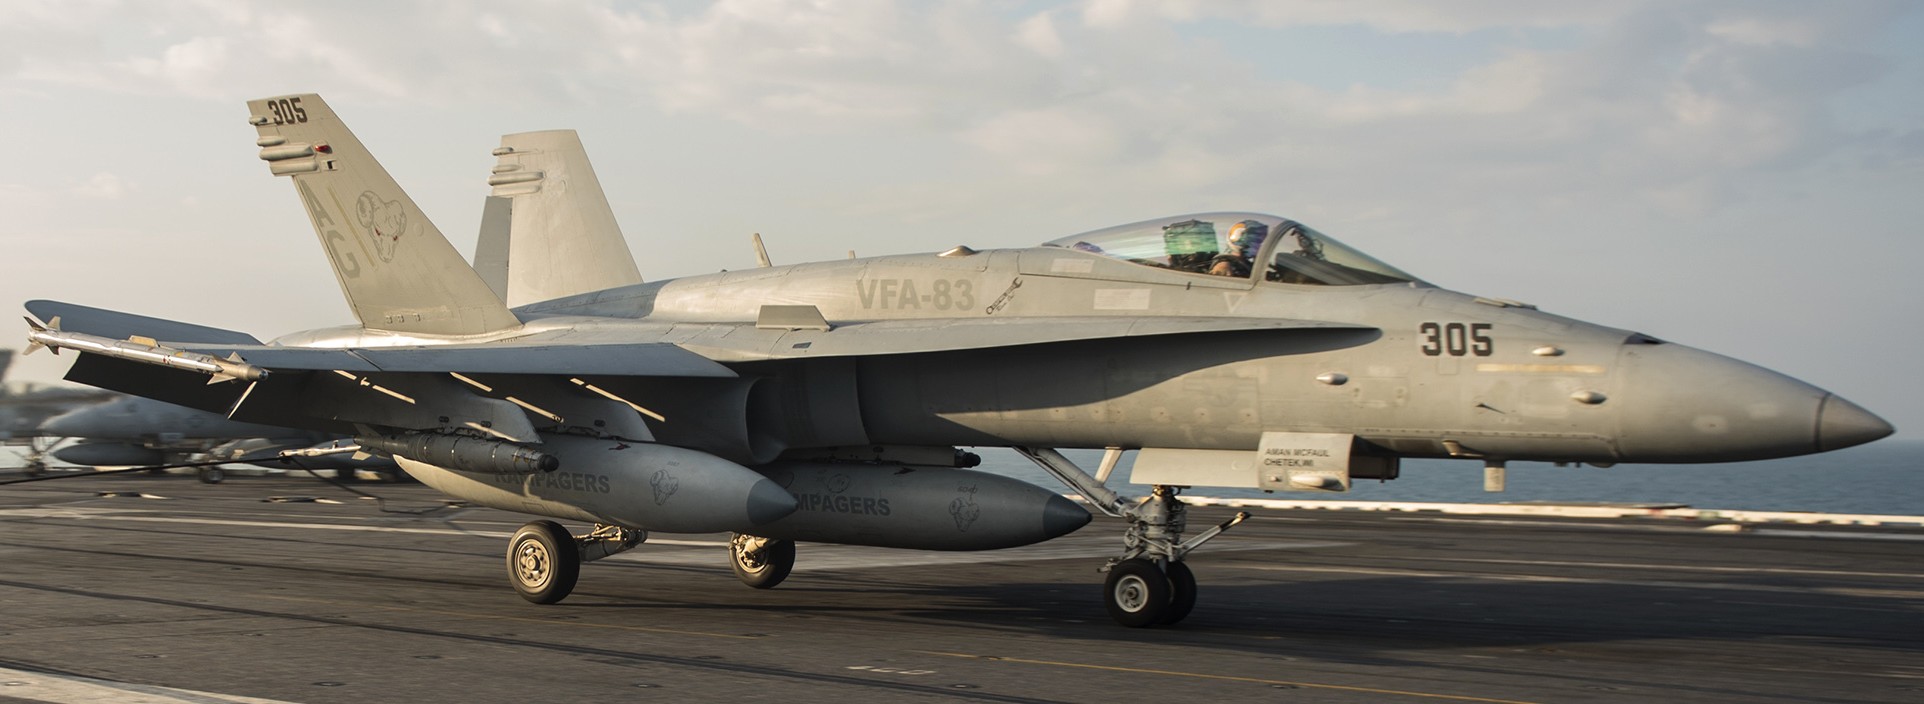 vfa-83 rampagers strike fighter squadron f/a-18c hornet cvw-7 uss harry s. truman cvn-75 35